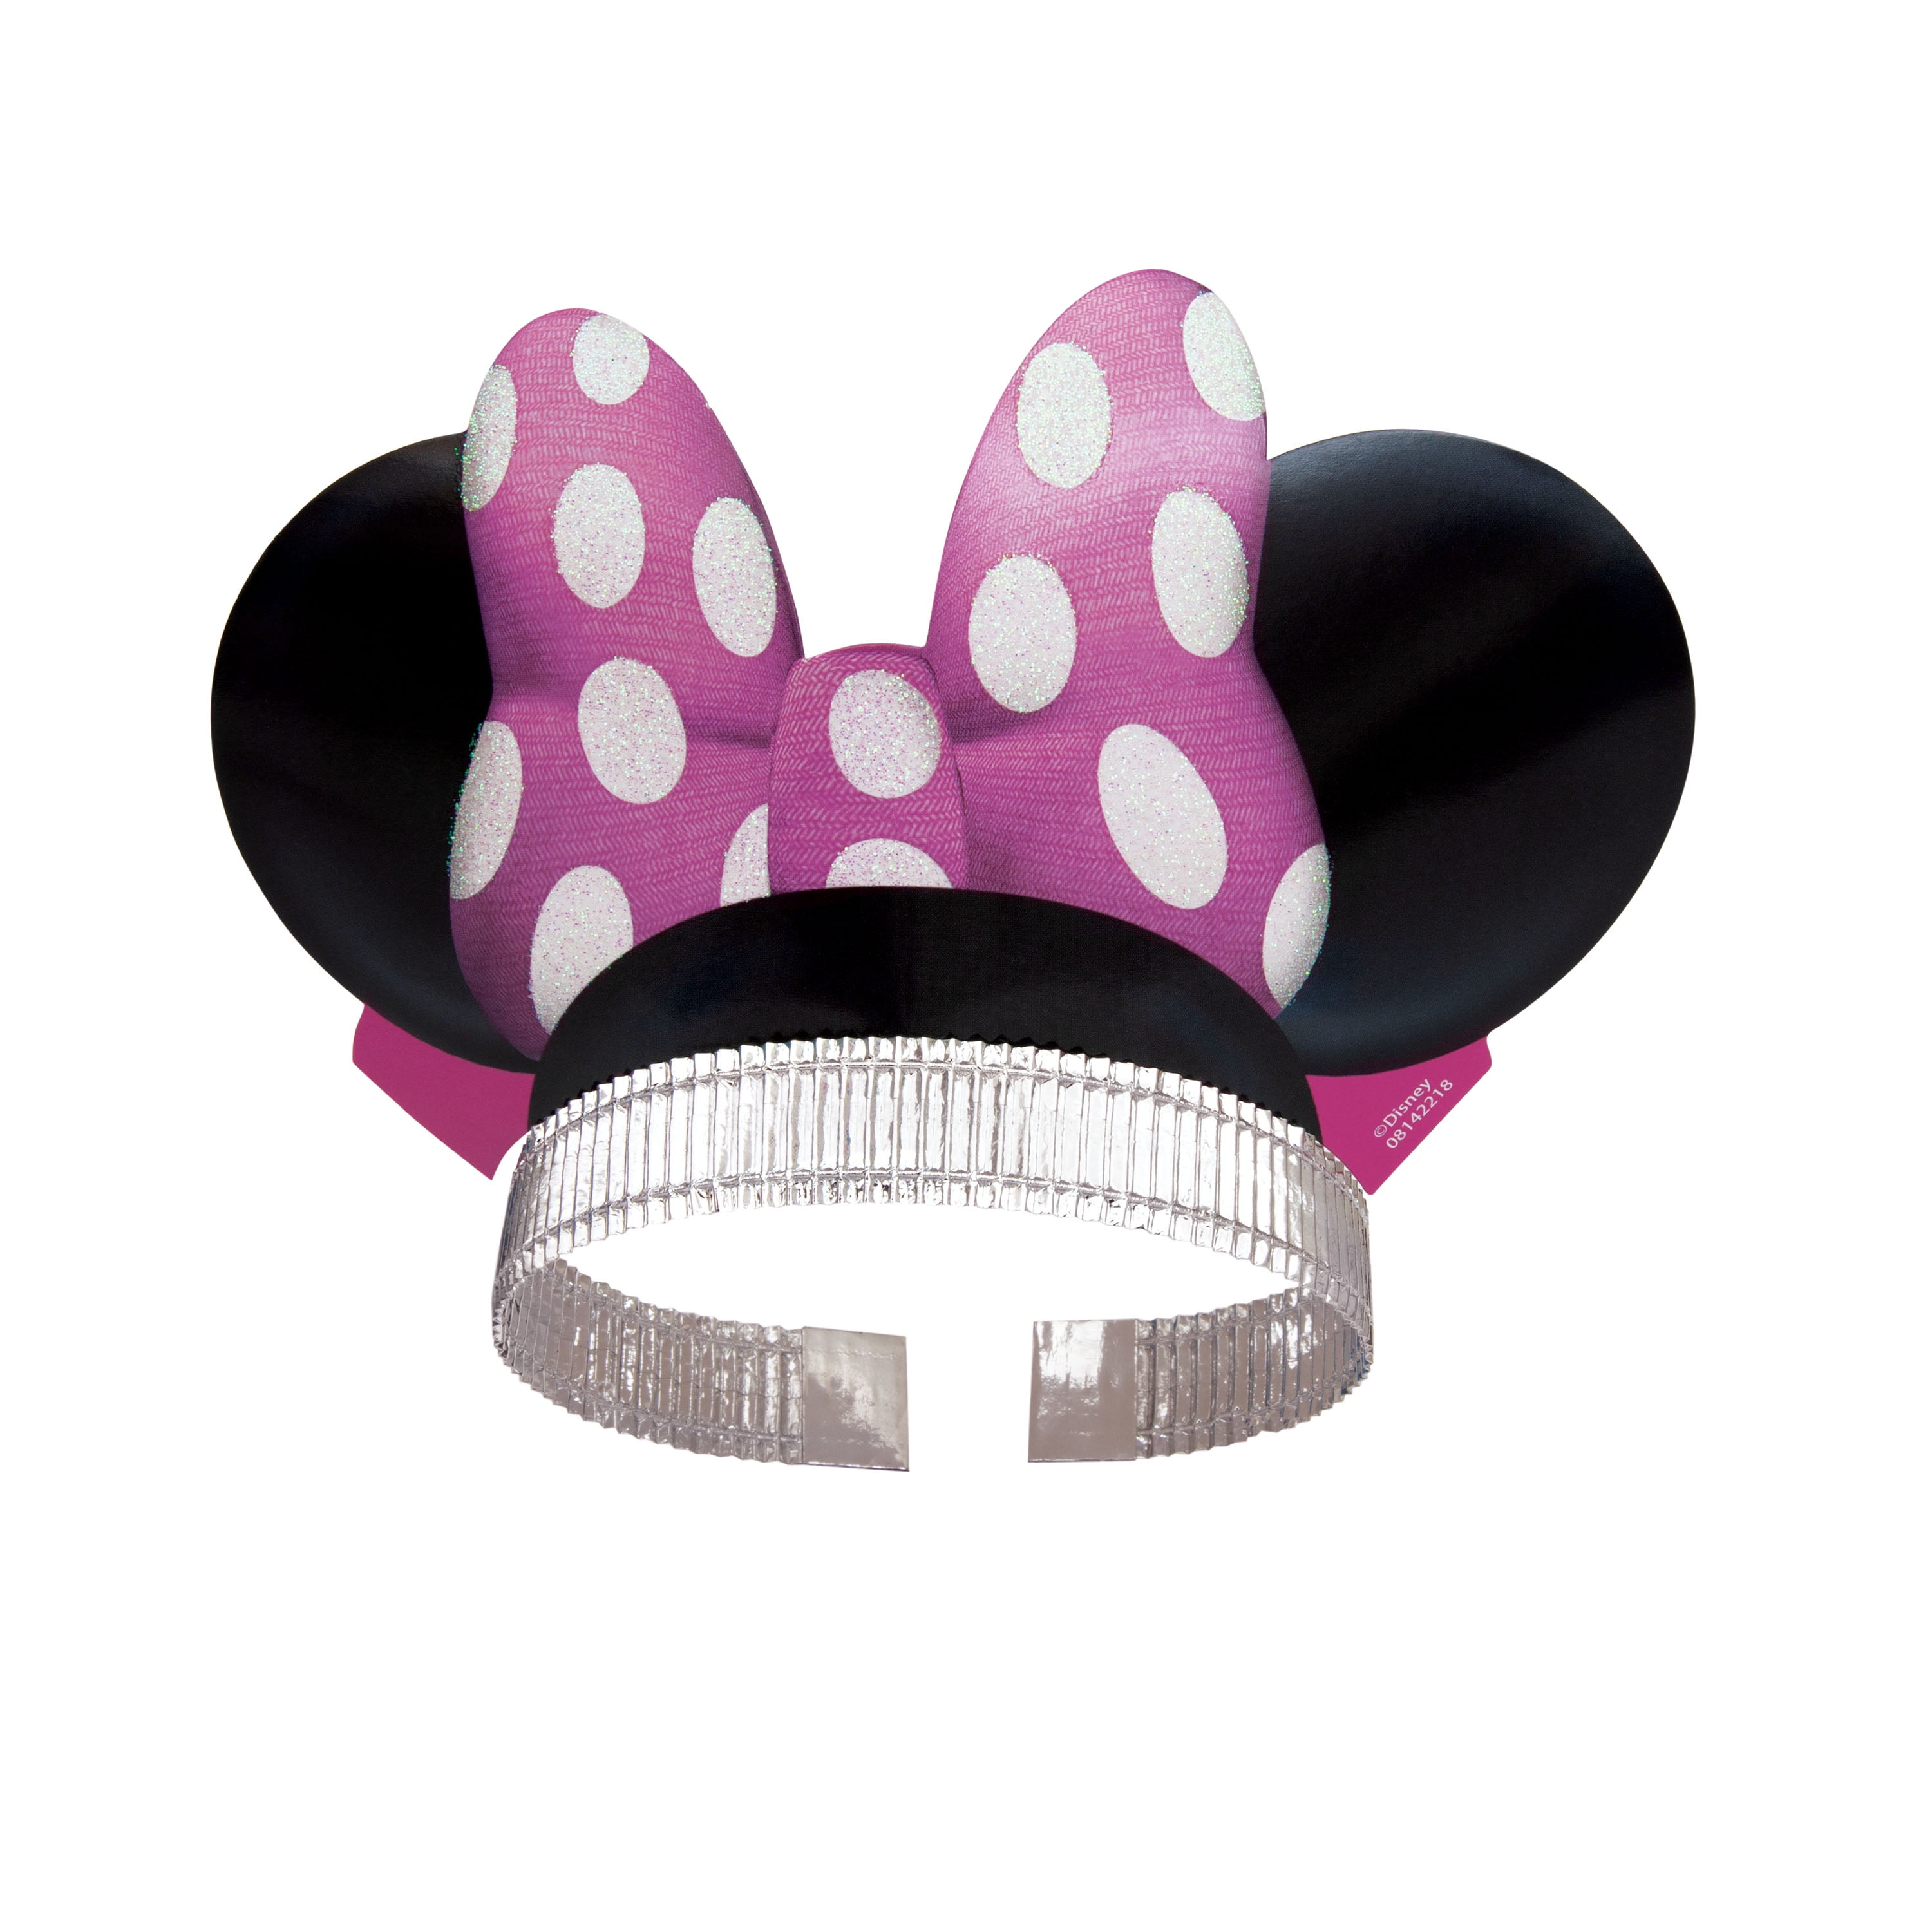 Mickey Minnie Mouse Party Supplies Hats Mouse Ears Headband Costume Fancy Dress 